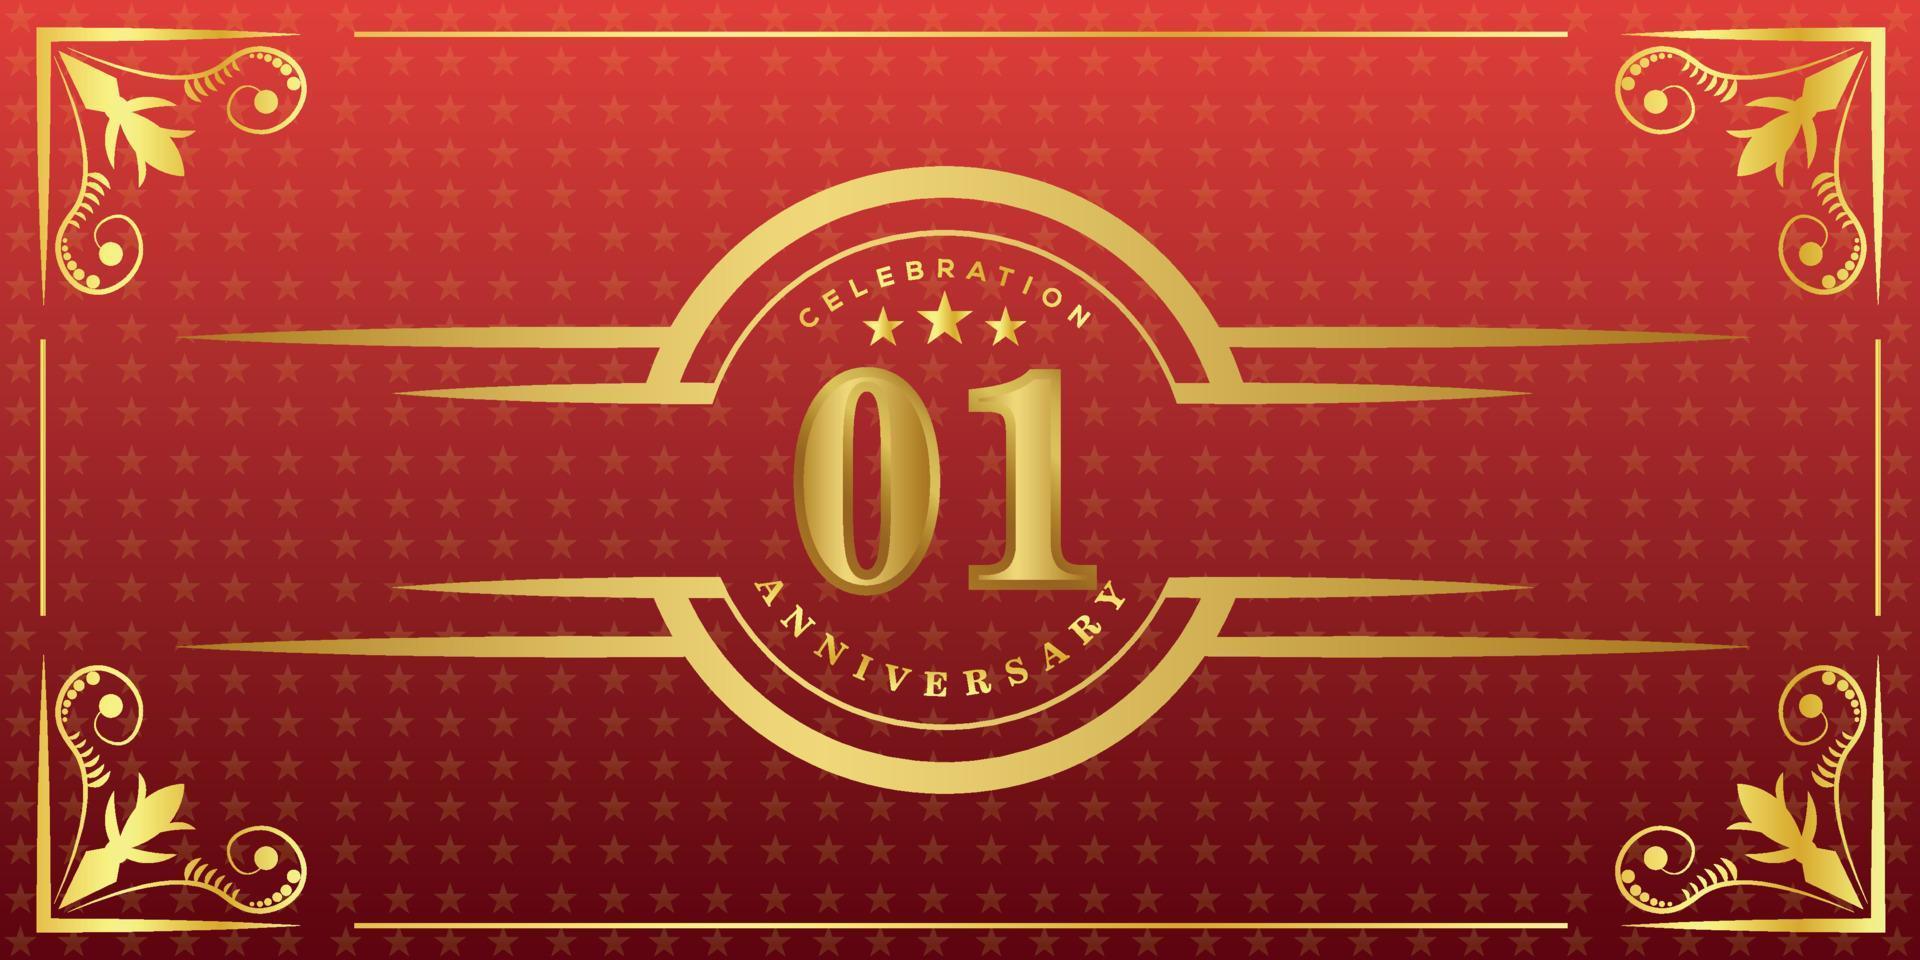 01st anniversary logo with golden ring, confetti and gold border isolated on elegant red background, sparkle, vector design for greeting card and invitation card